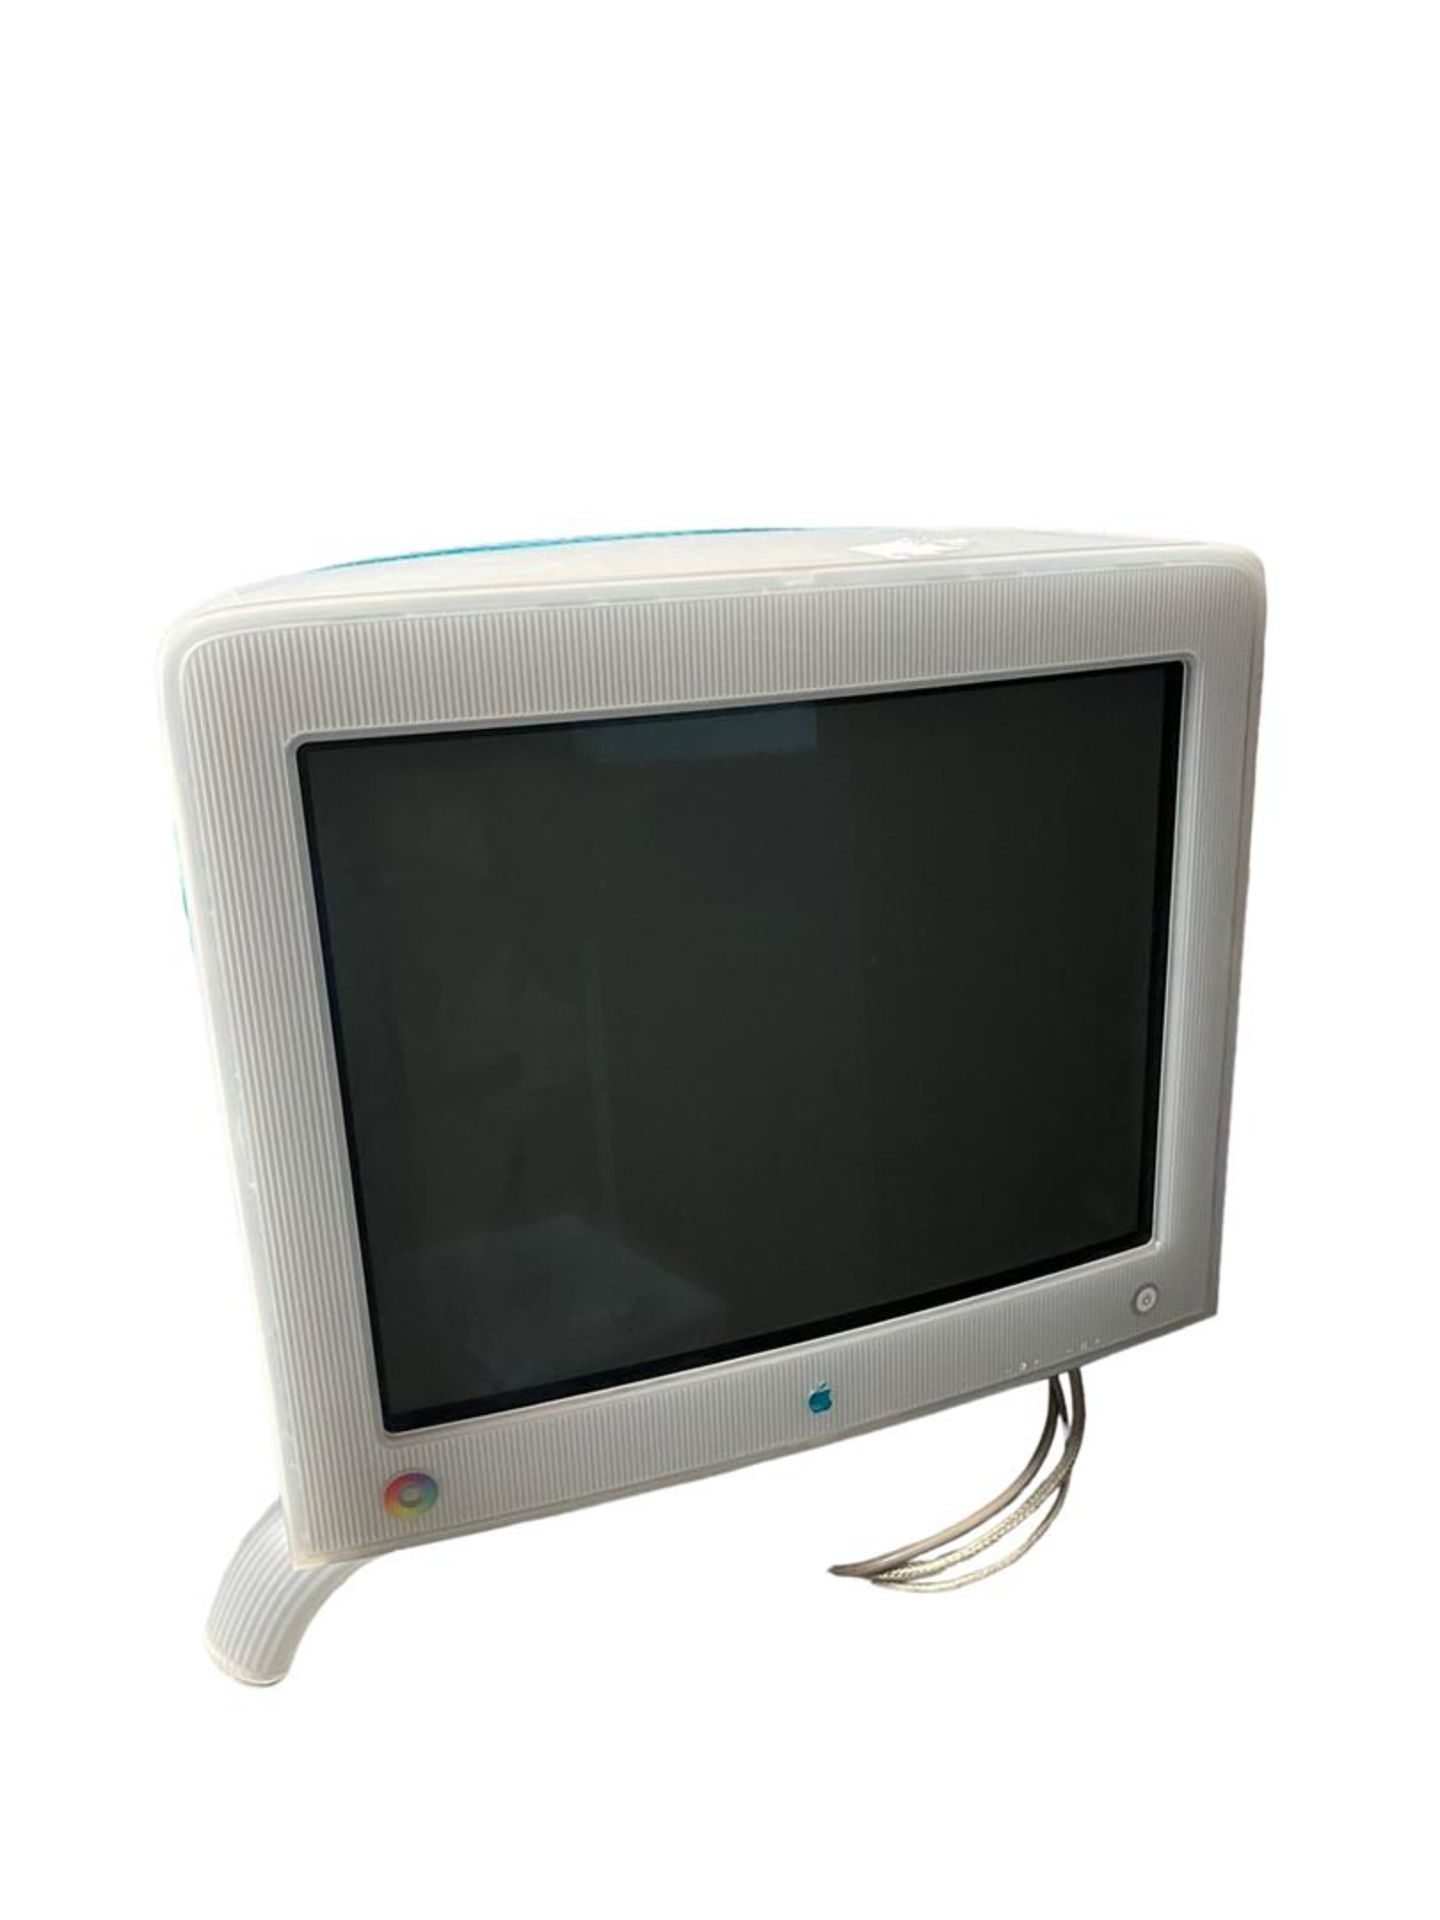 macintosh M6496 18 inch screen, not tested.